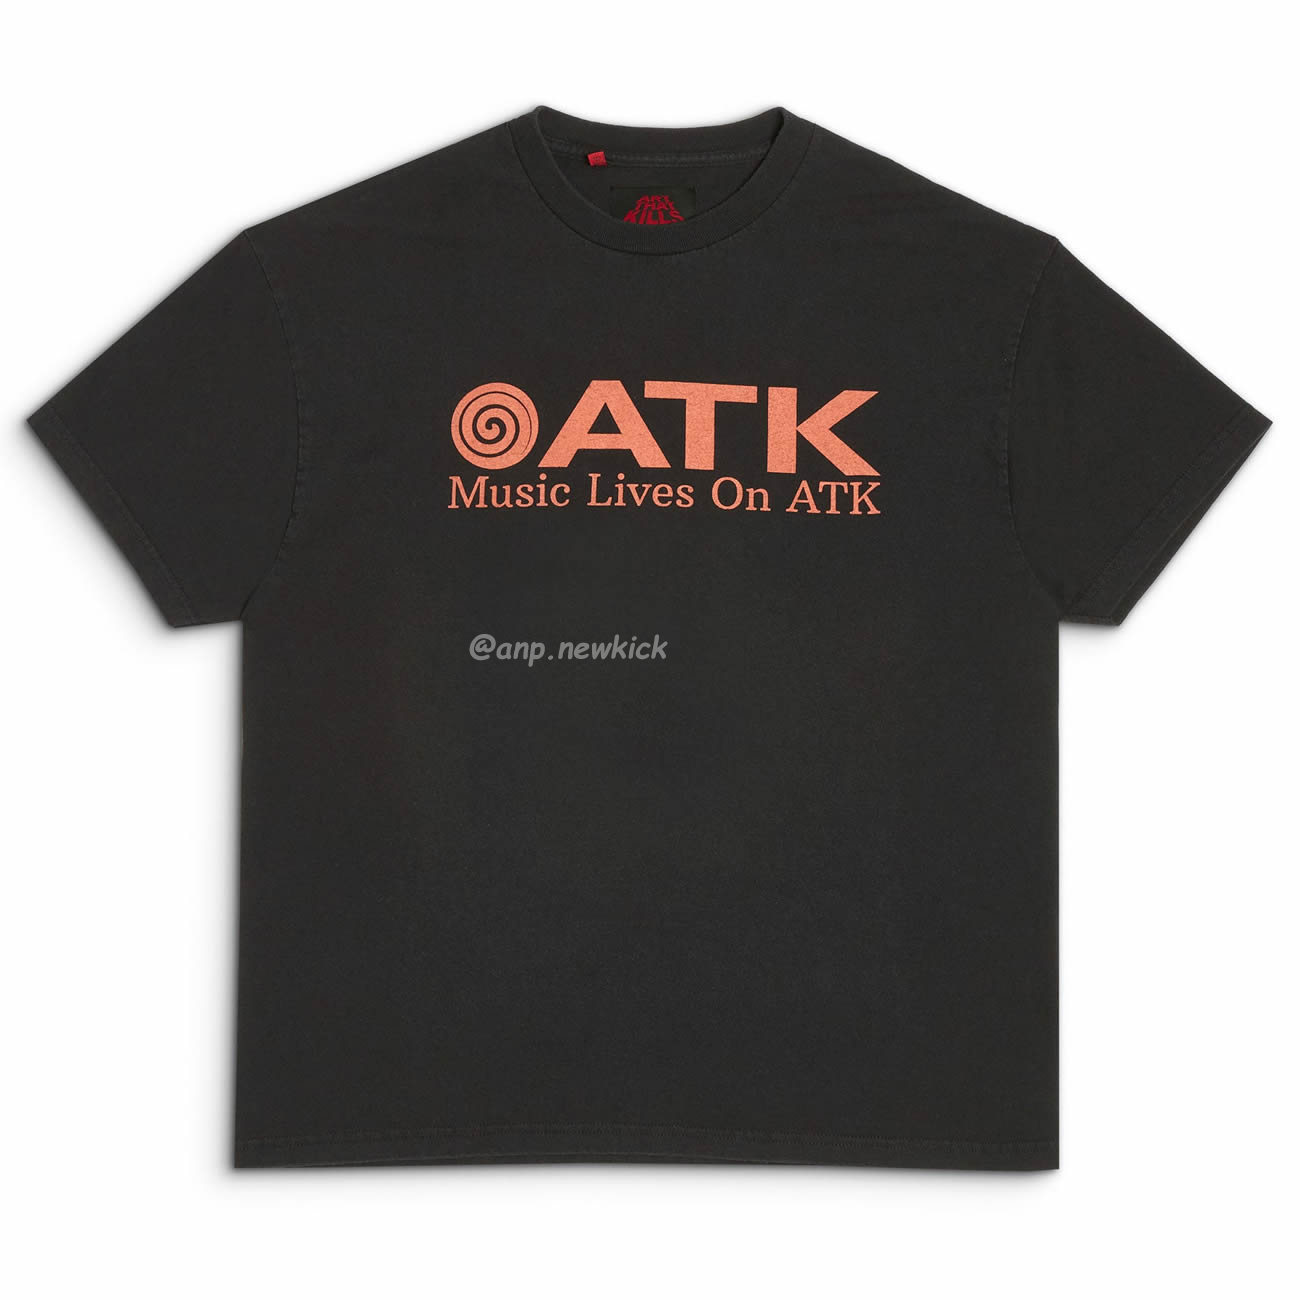 Gallery Dept Music Lives On Atk Tee Art Design Exclusive Retro Distressed Washed Short Sleeve T Shirt (2) - newkick.org